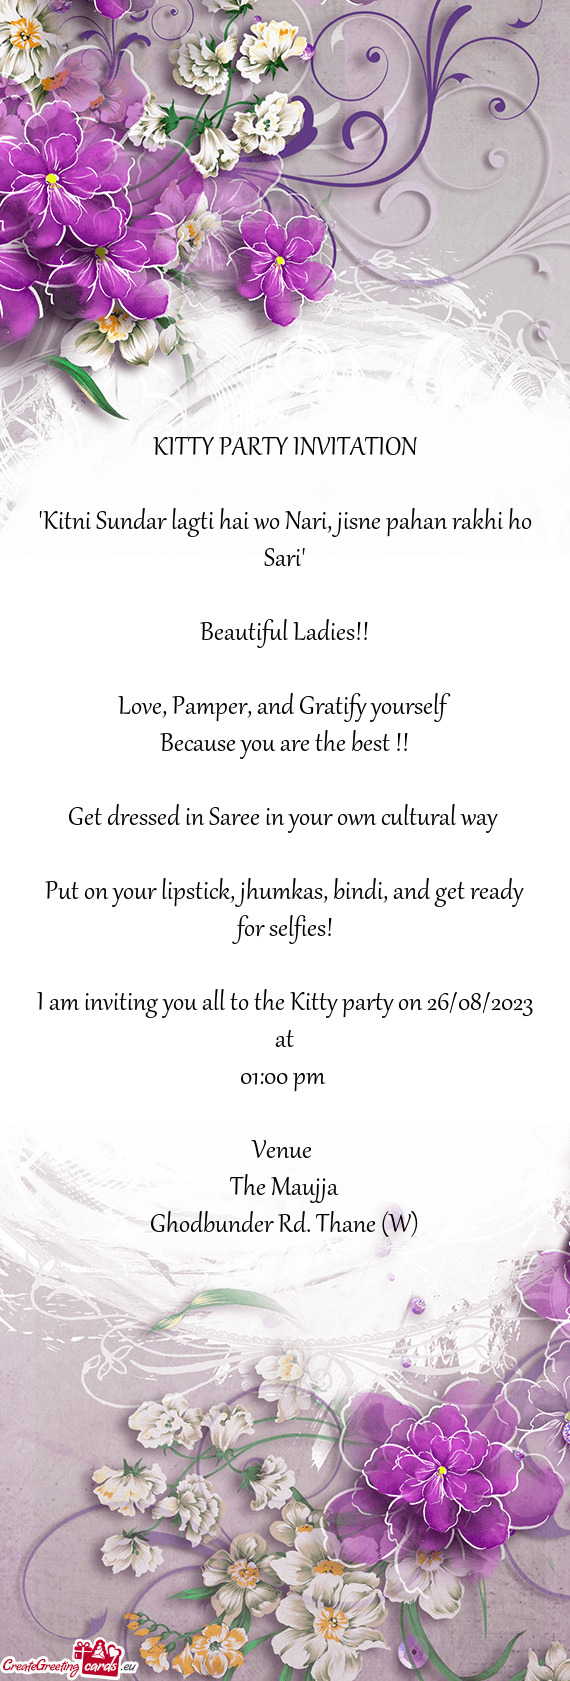 Love, Pamper, and Gratify yourself